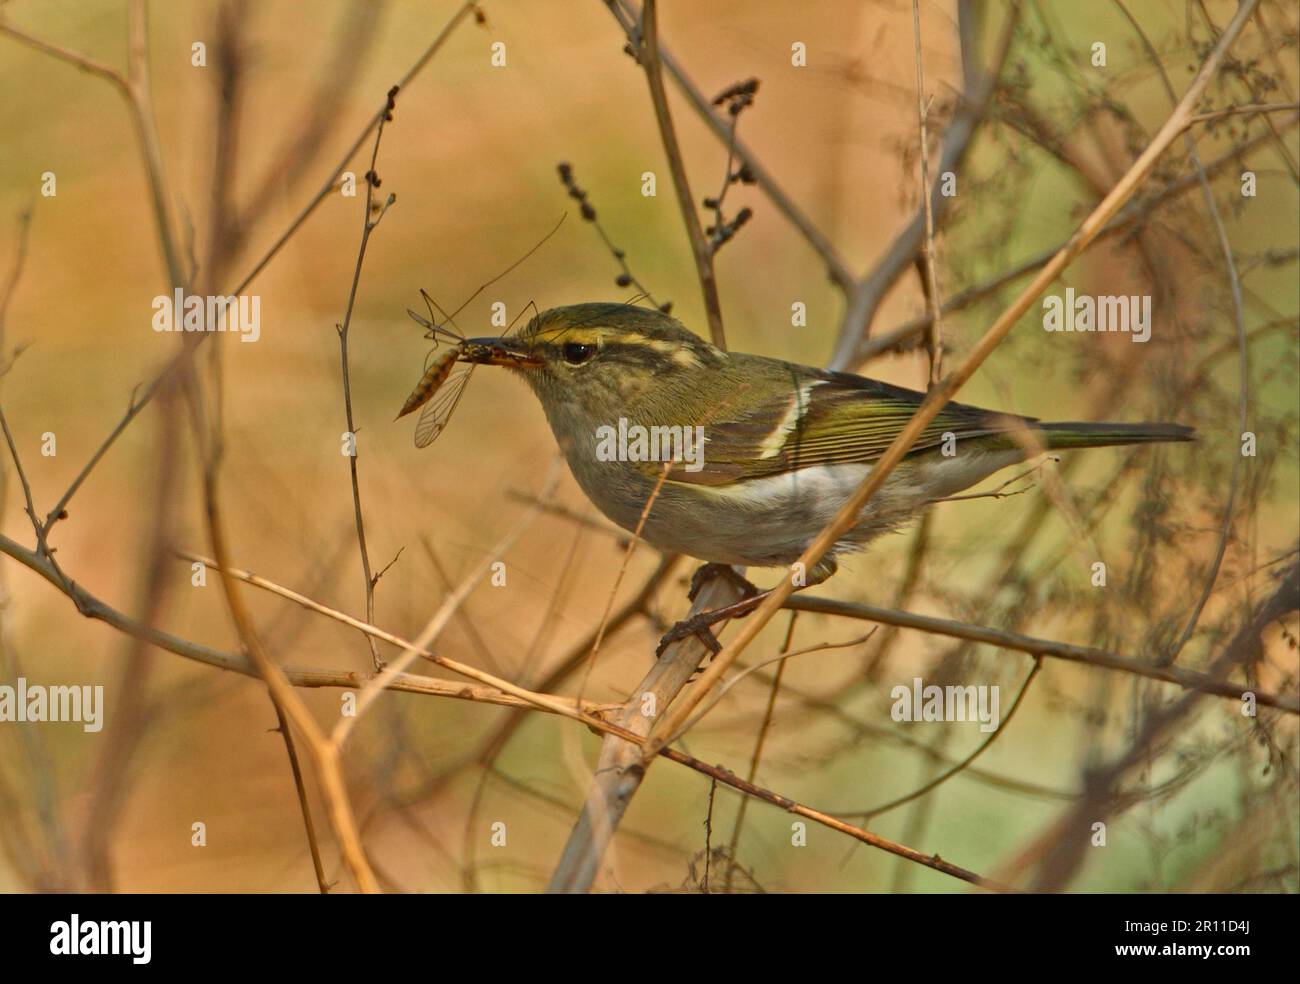 Pallas's Warbler (Phylloscopus proregulus) adult, with cranefly prey in beak, perched on stem, Hebei, China Stock Photo